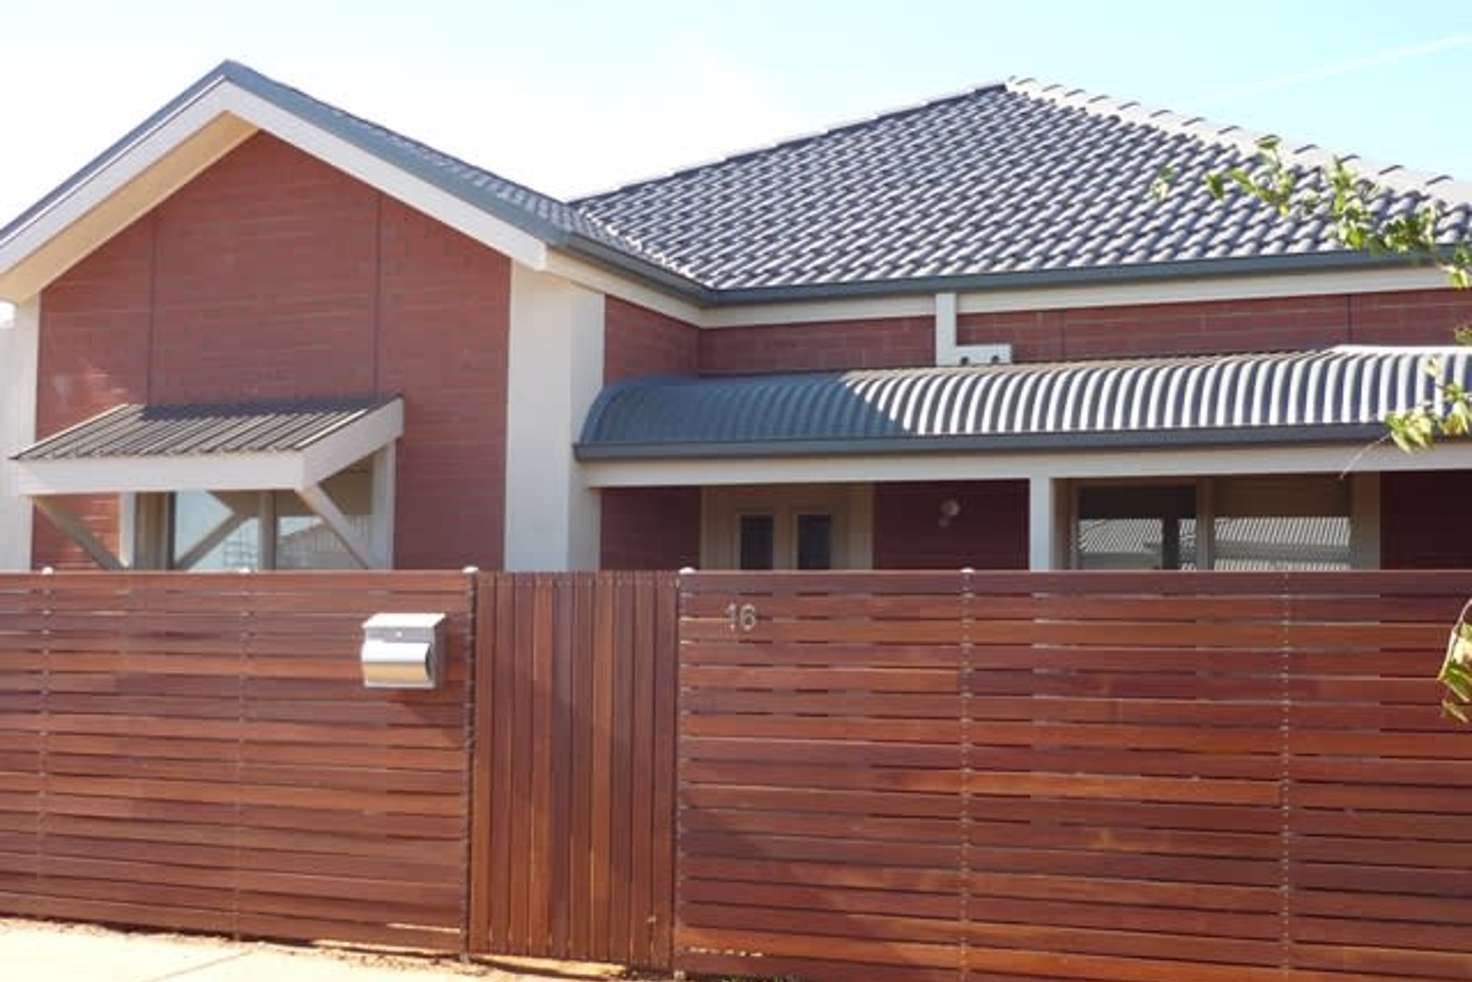 Main view of Homely house listing, 16 Hinckley St, Blakeview SA 5114